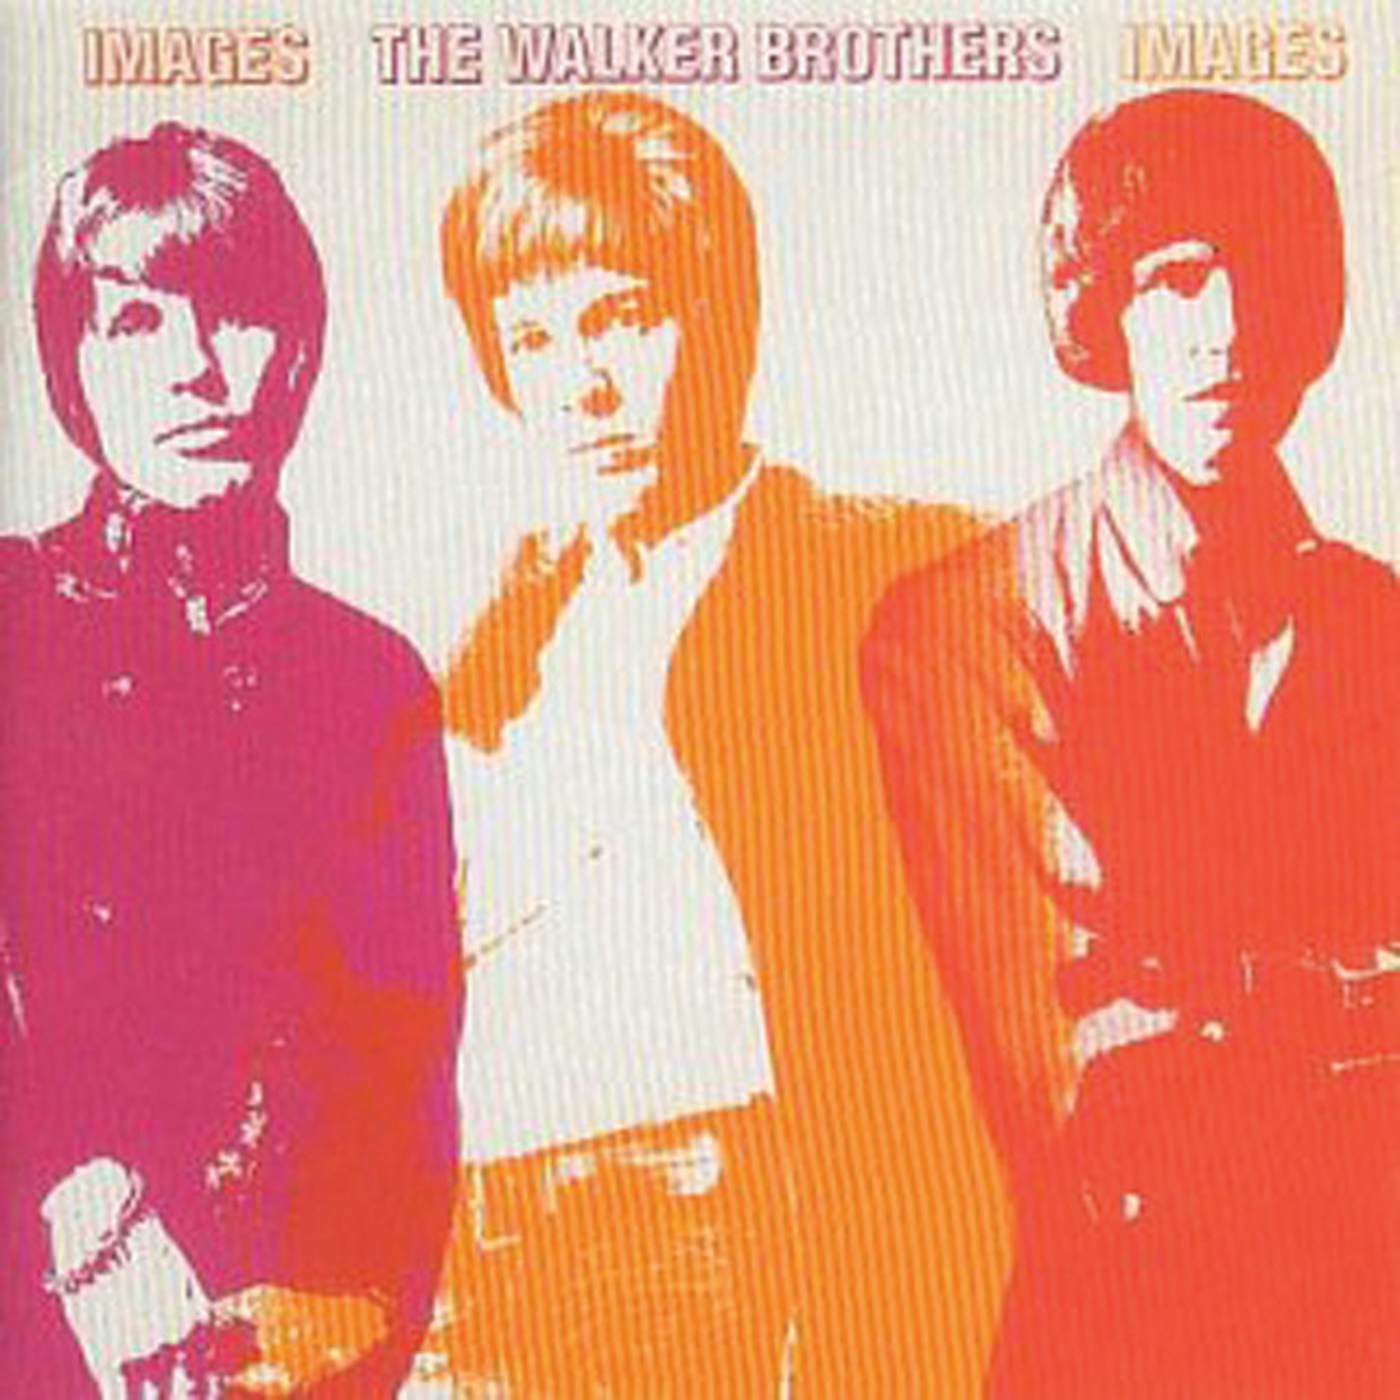 The Walker Brothers IMAGES CD